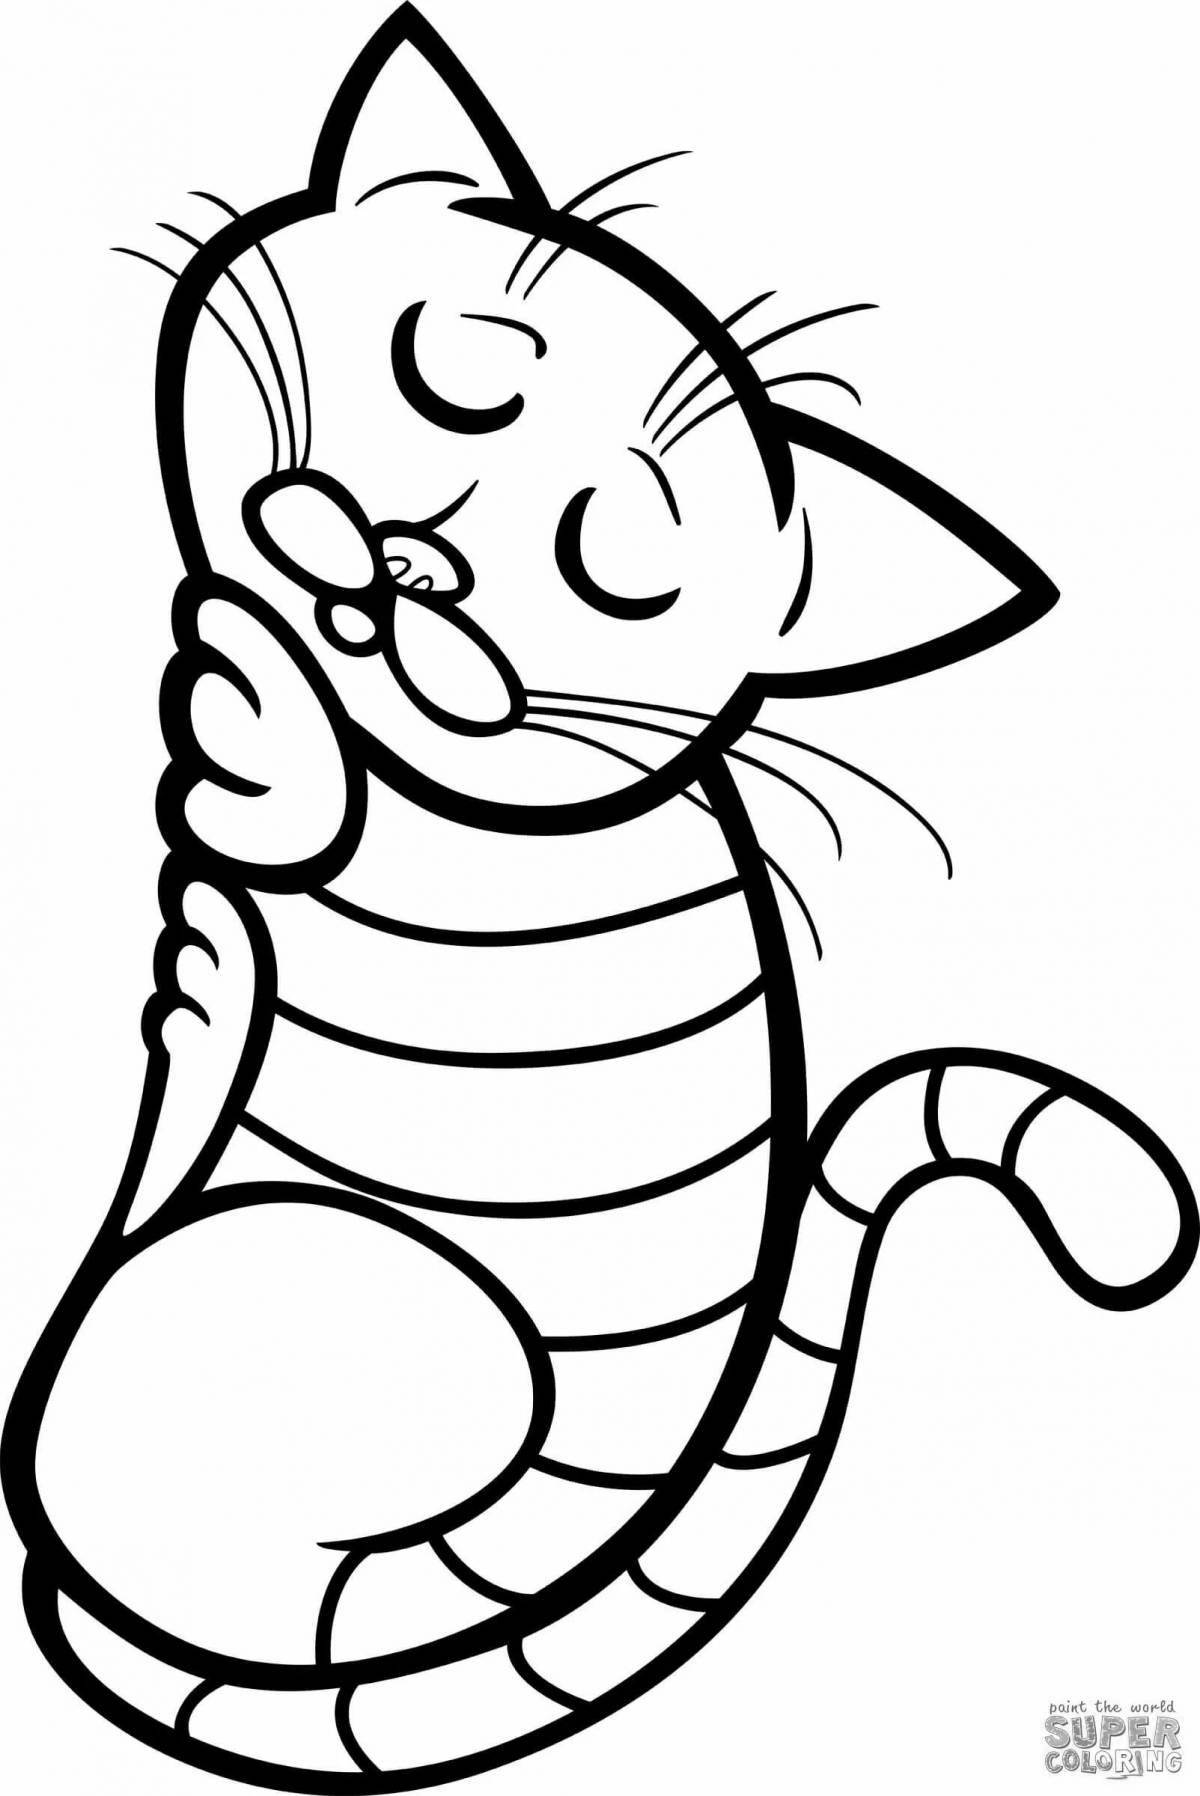 Alert tabby cat coloring page